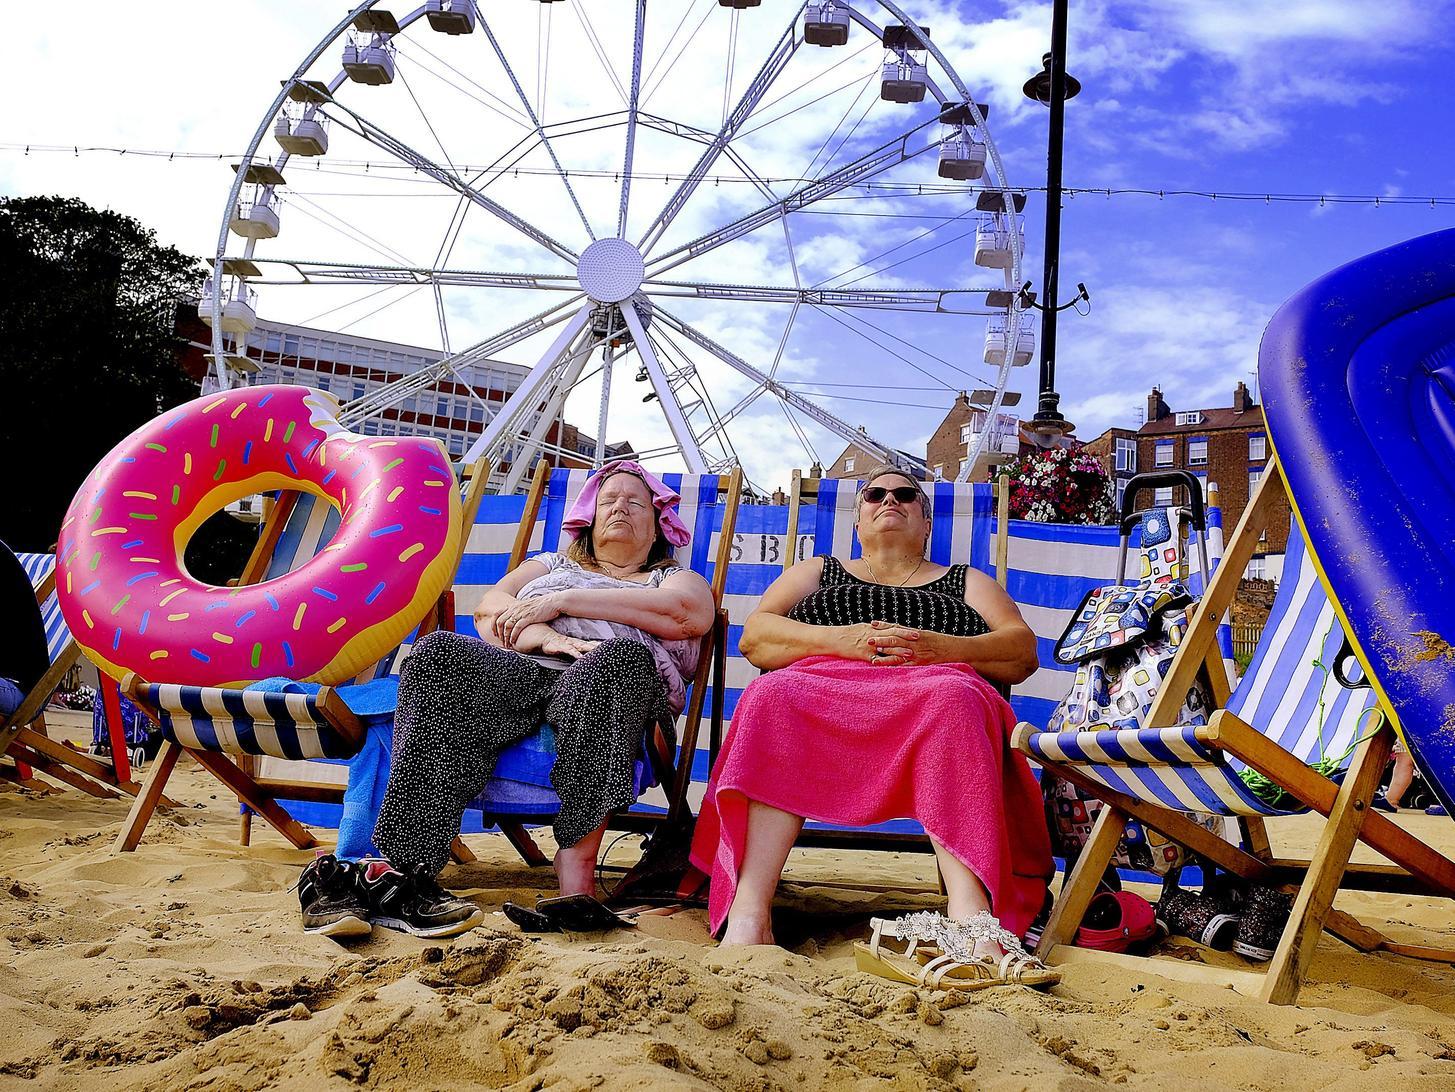 Bank holiday on Scarborough's South Bay beach, with the big wheel last year providing a different backdrop. Photo: Richard Ponter